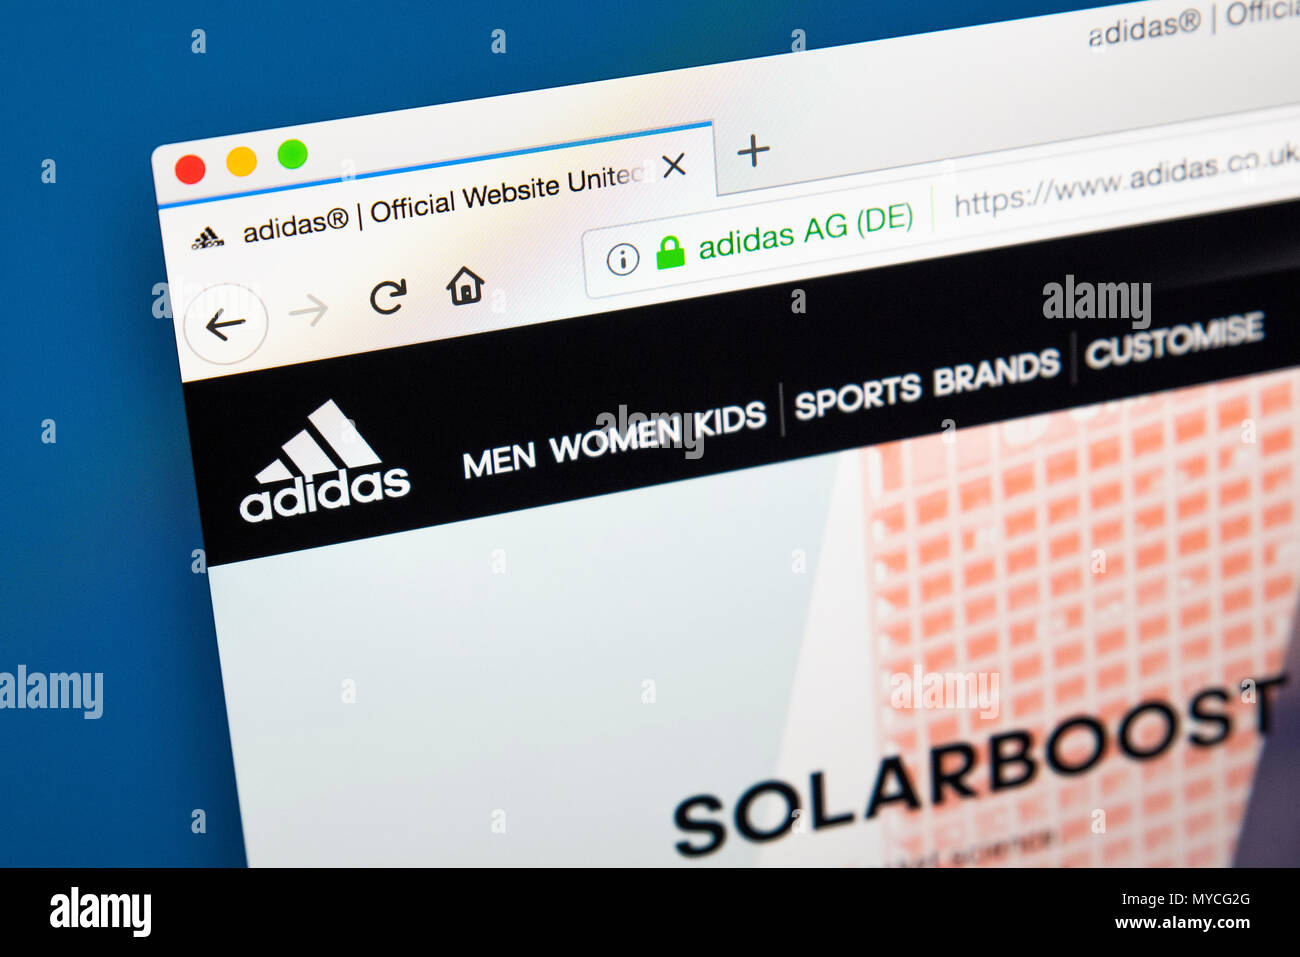 LONDON, UK - MAY 23RD 2018: The homepage of the official website for Adidas - the largest sportswear manufacturer in Europe, on 23rd May 2018 Stock Photo Alamy